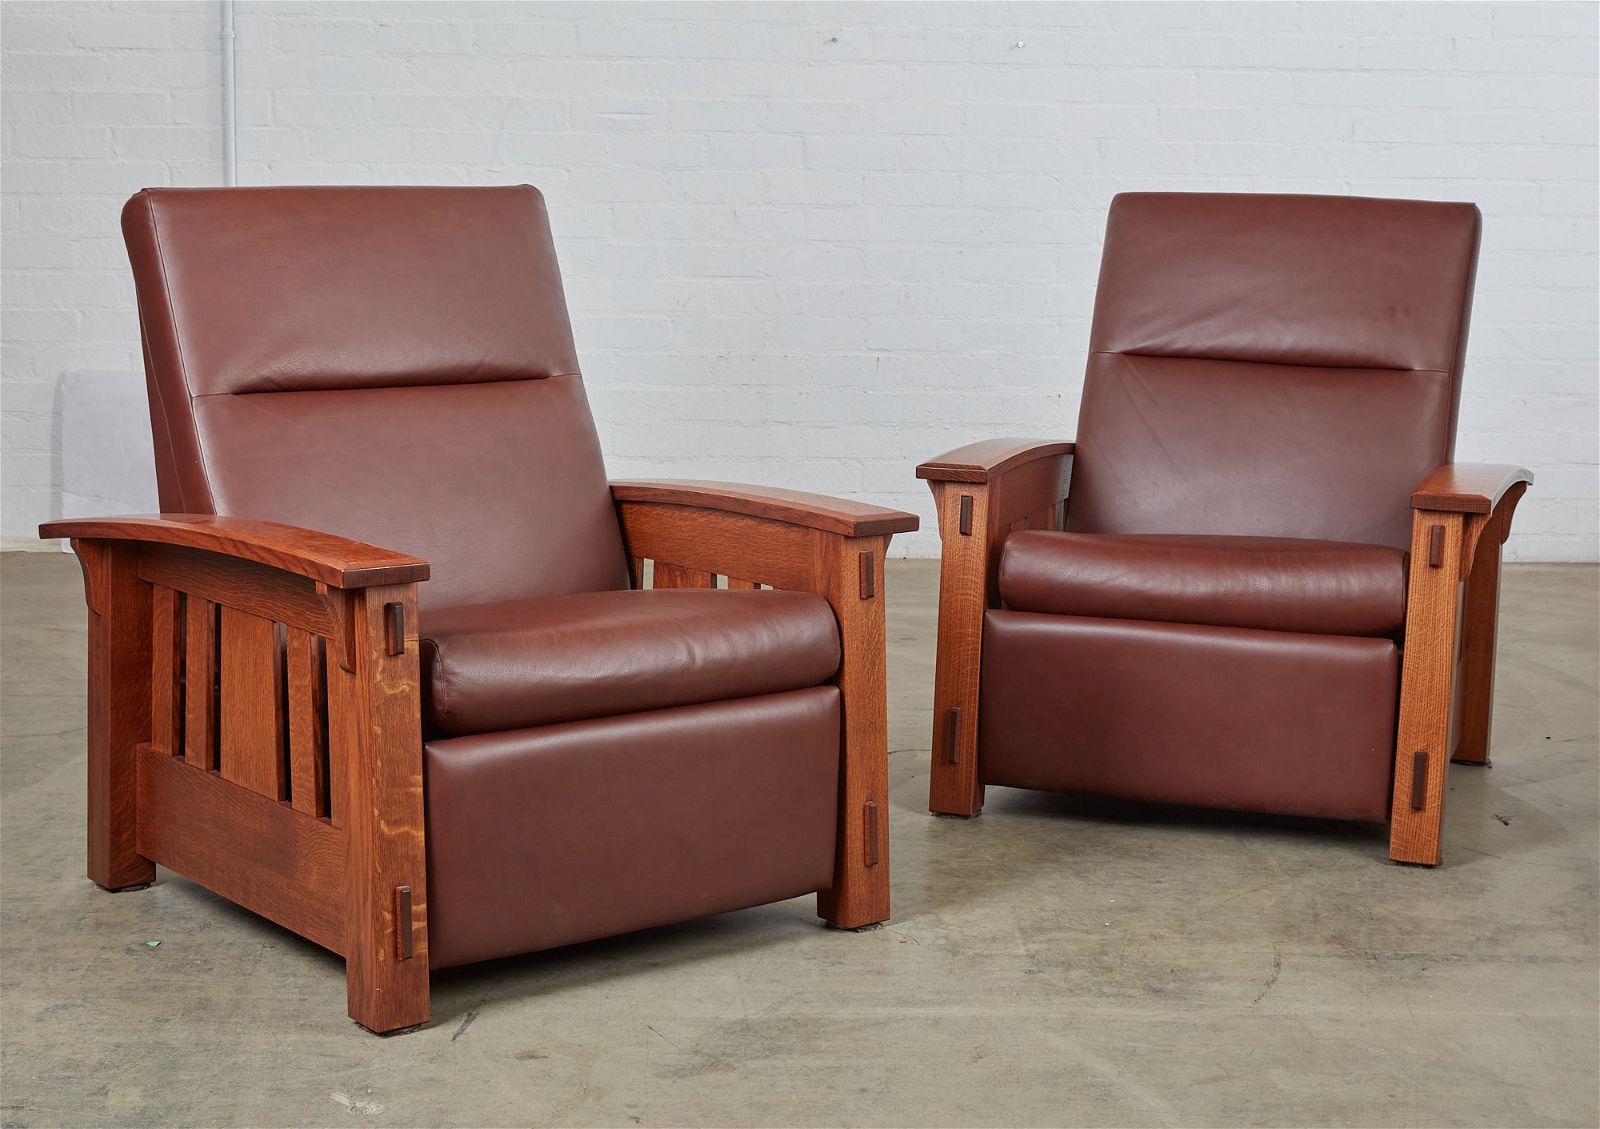 A PAIR OF ARTS CRAFTS STYLE RECLINING 2fb4256